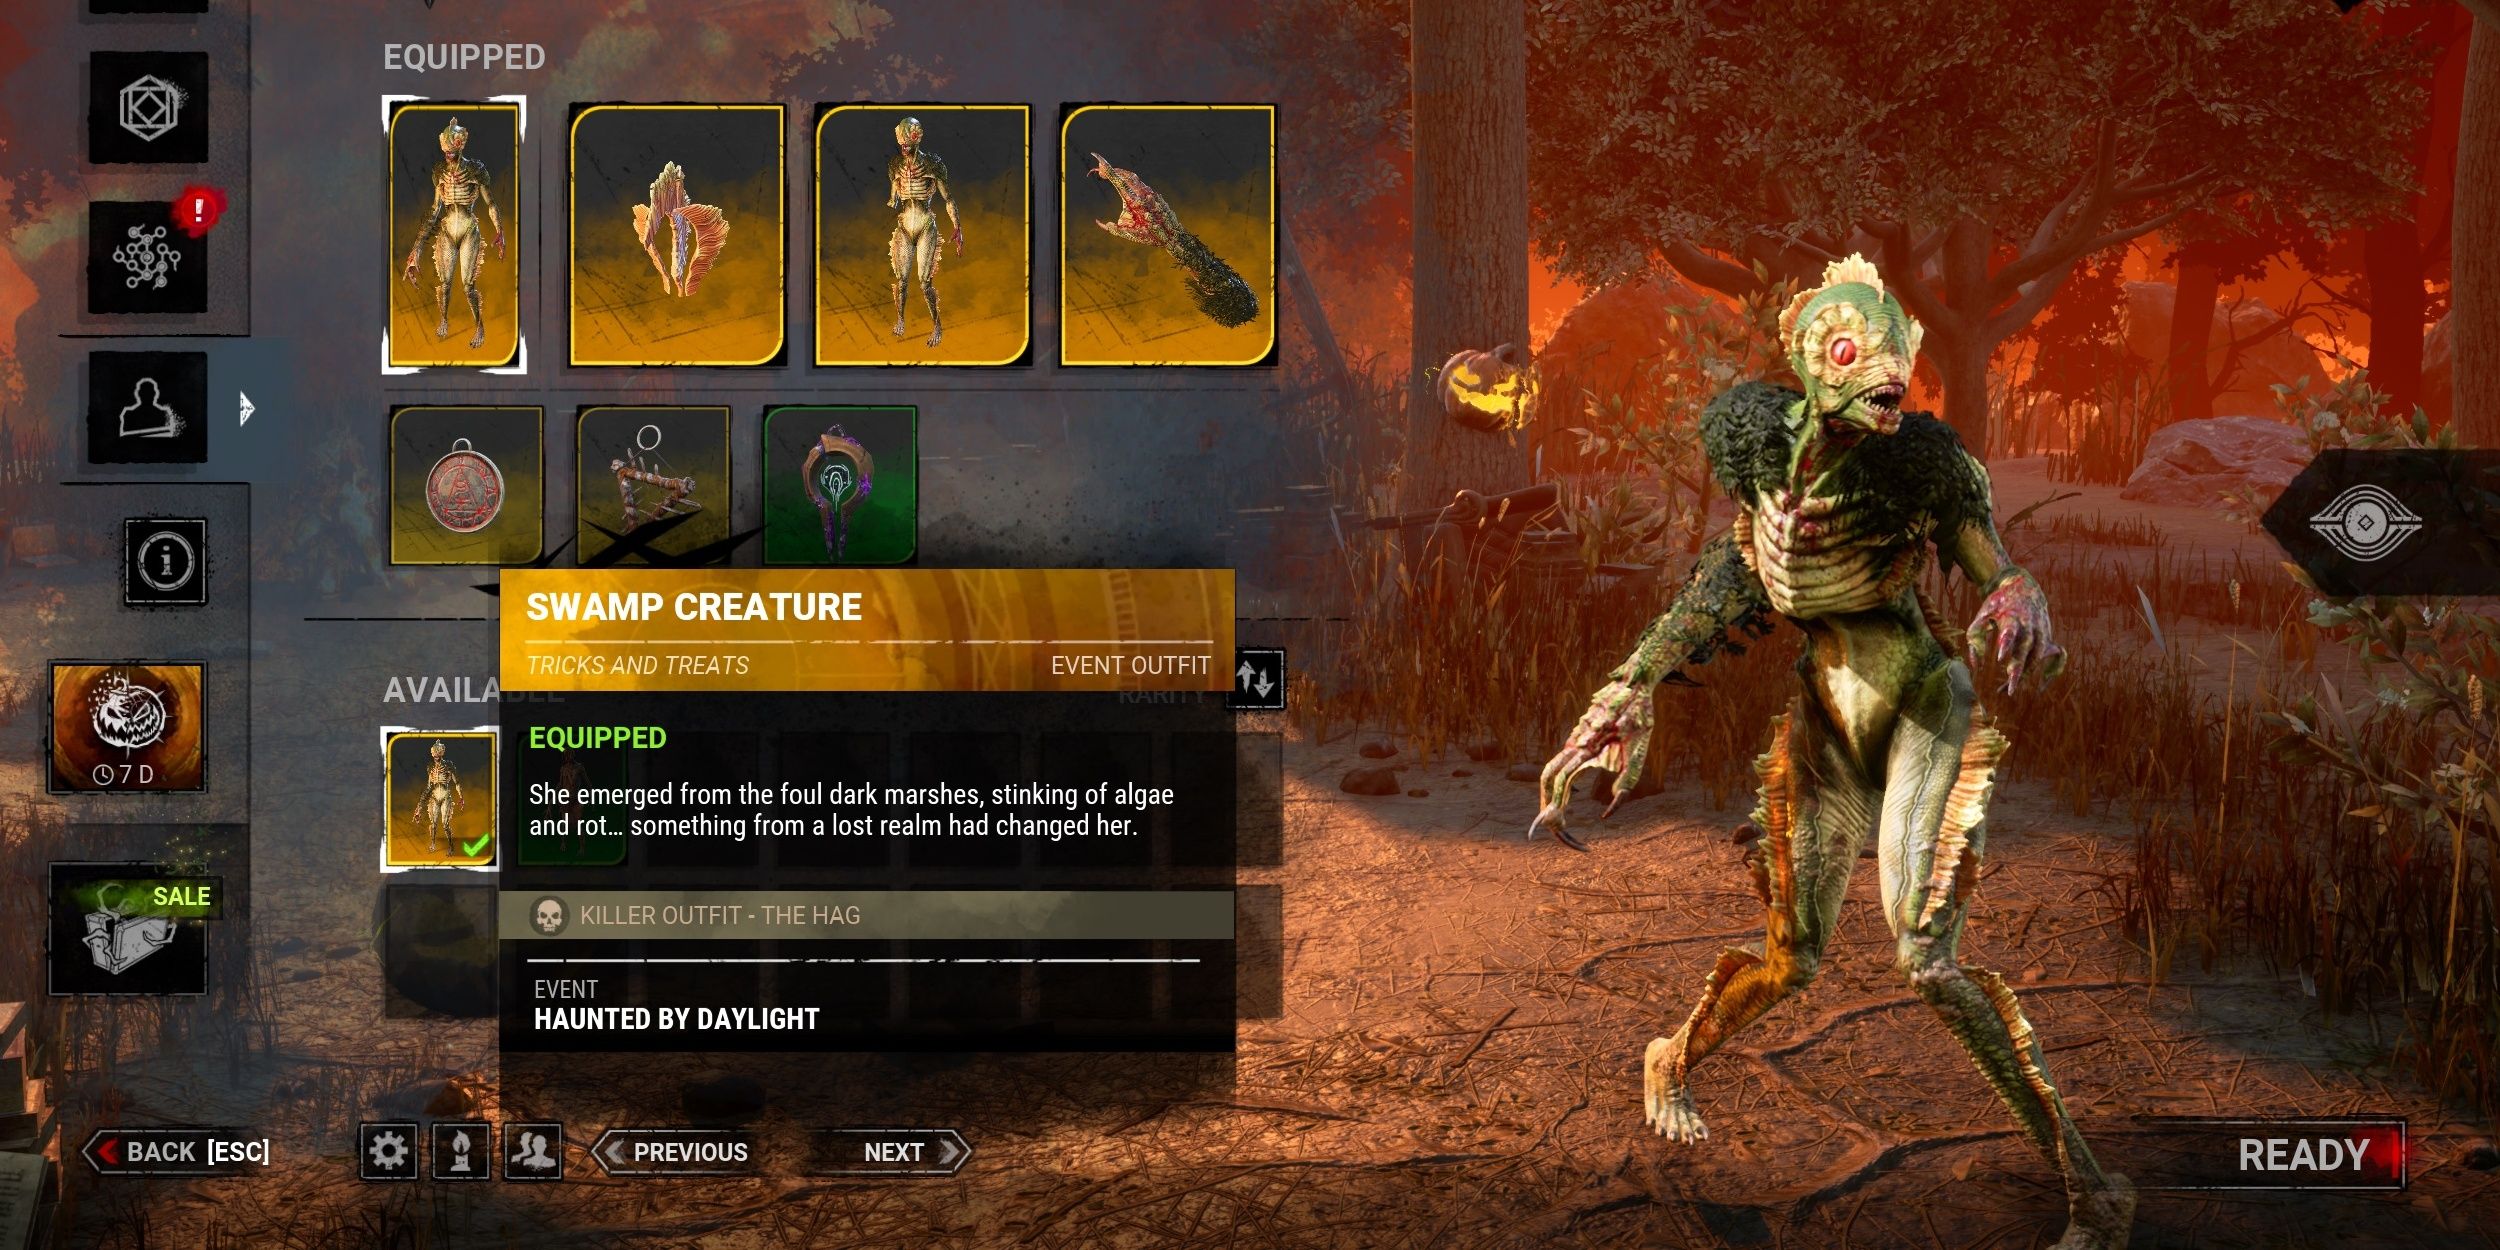 The Hag in the Swamp Creature cosmetic set and looking scary AF